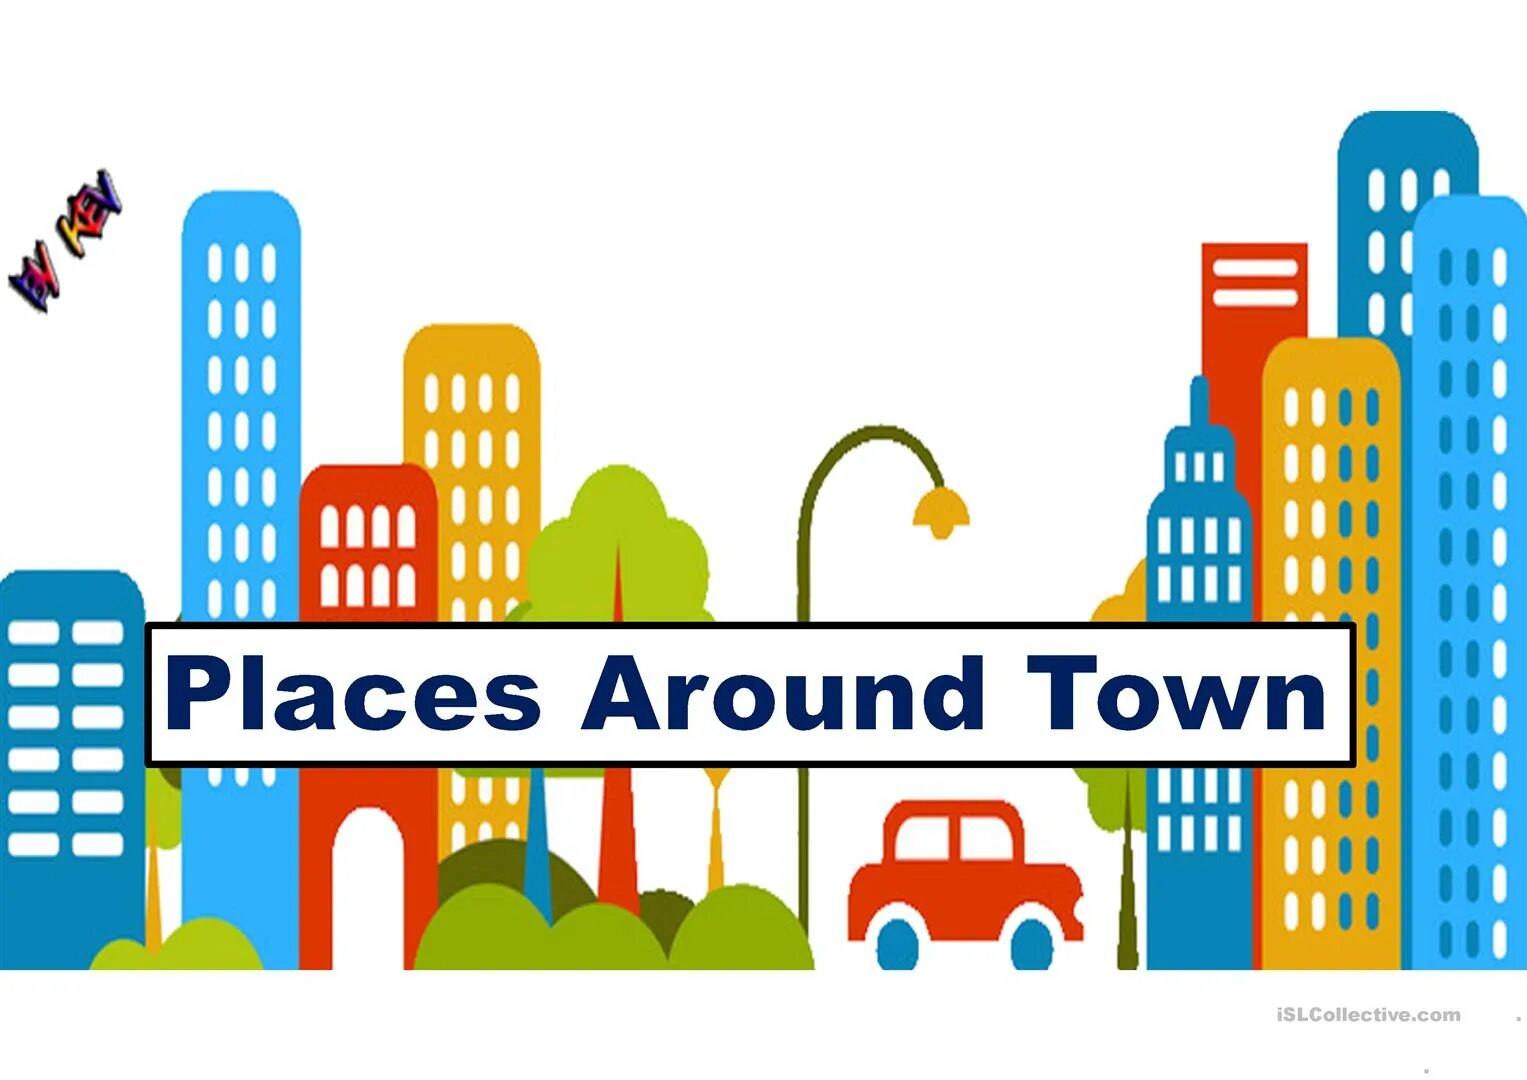 Places around Town. Places in Town для детей. Around Town 5 класс. Places around City. Getting around the city